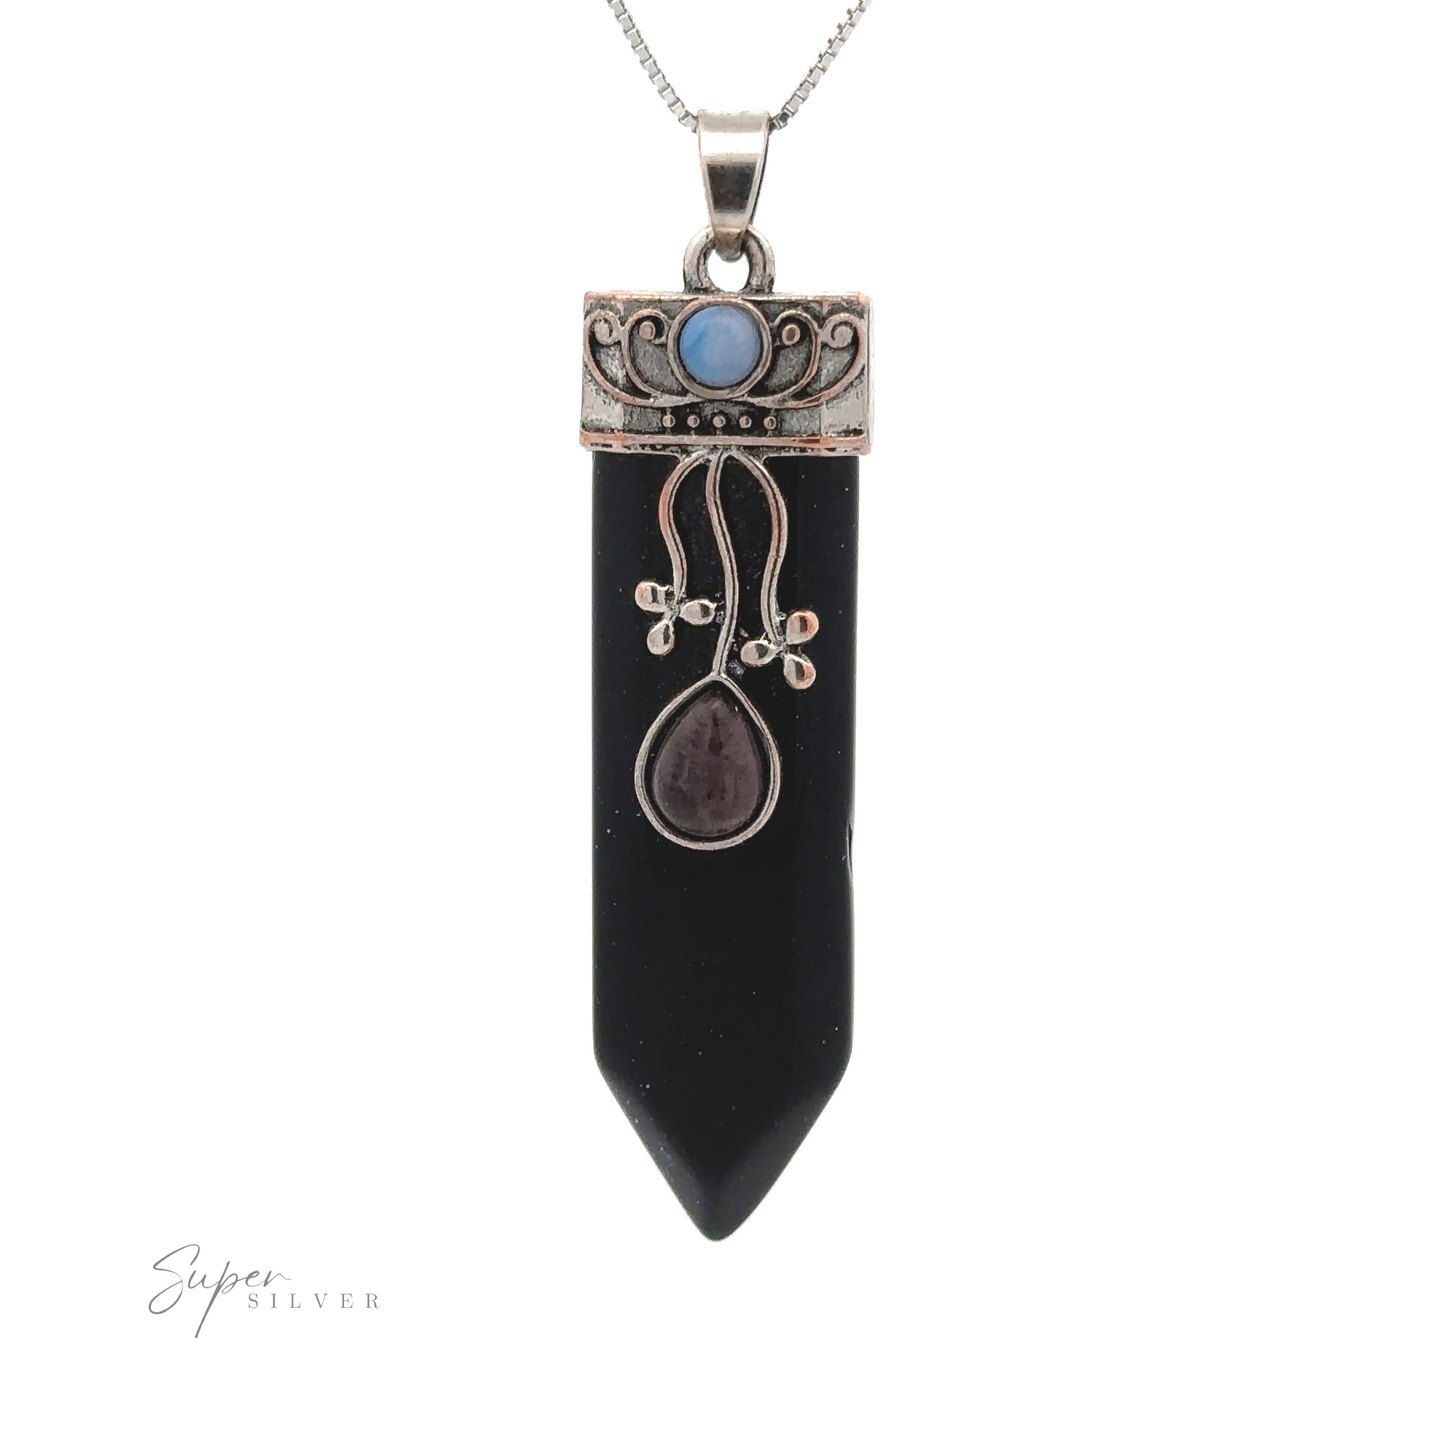 
                  
                    A Boho Obelisk Crystal Stone Pendant featuring a black pointed stone with silver accents, an Opalite circular gemstone, and decorative designs. The pendant is suspended from a silver chain.
                  
                